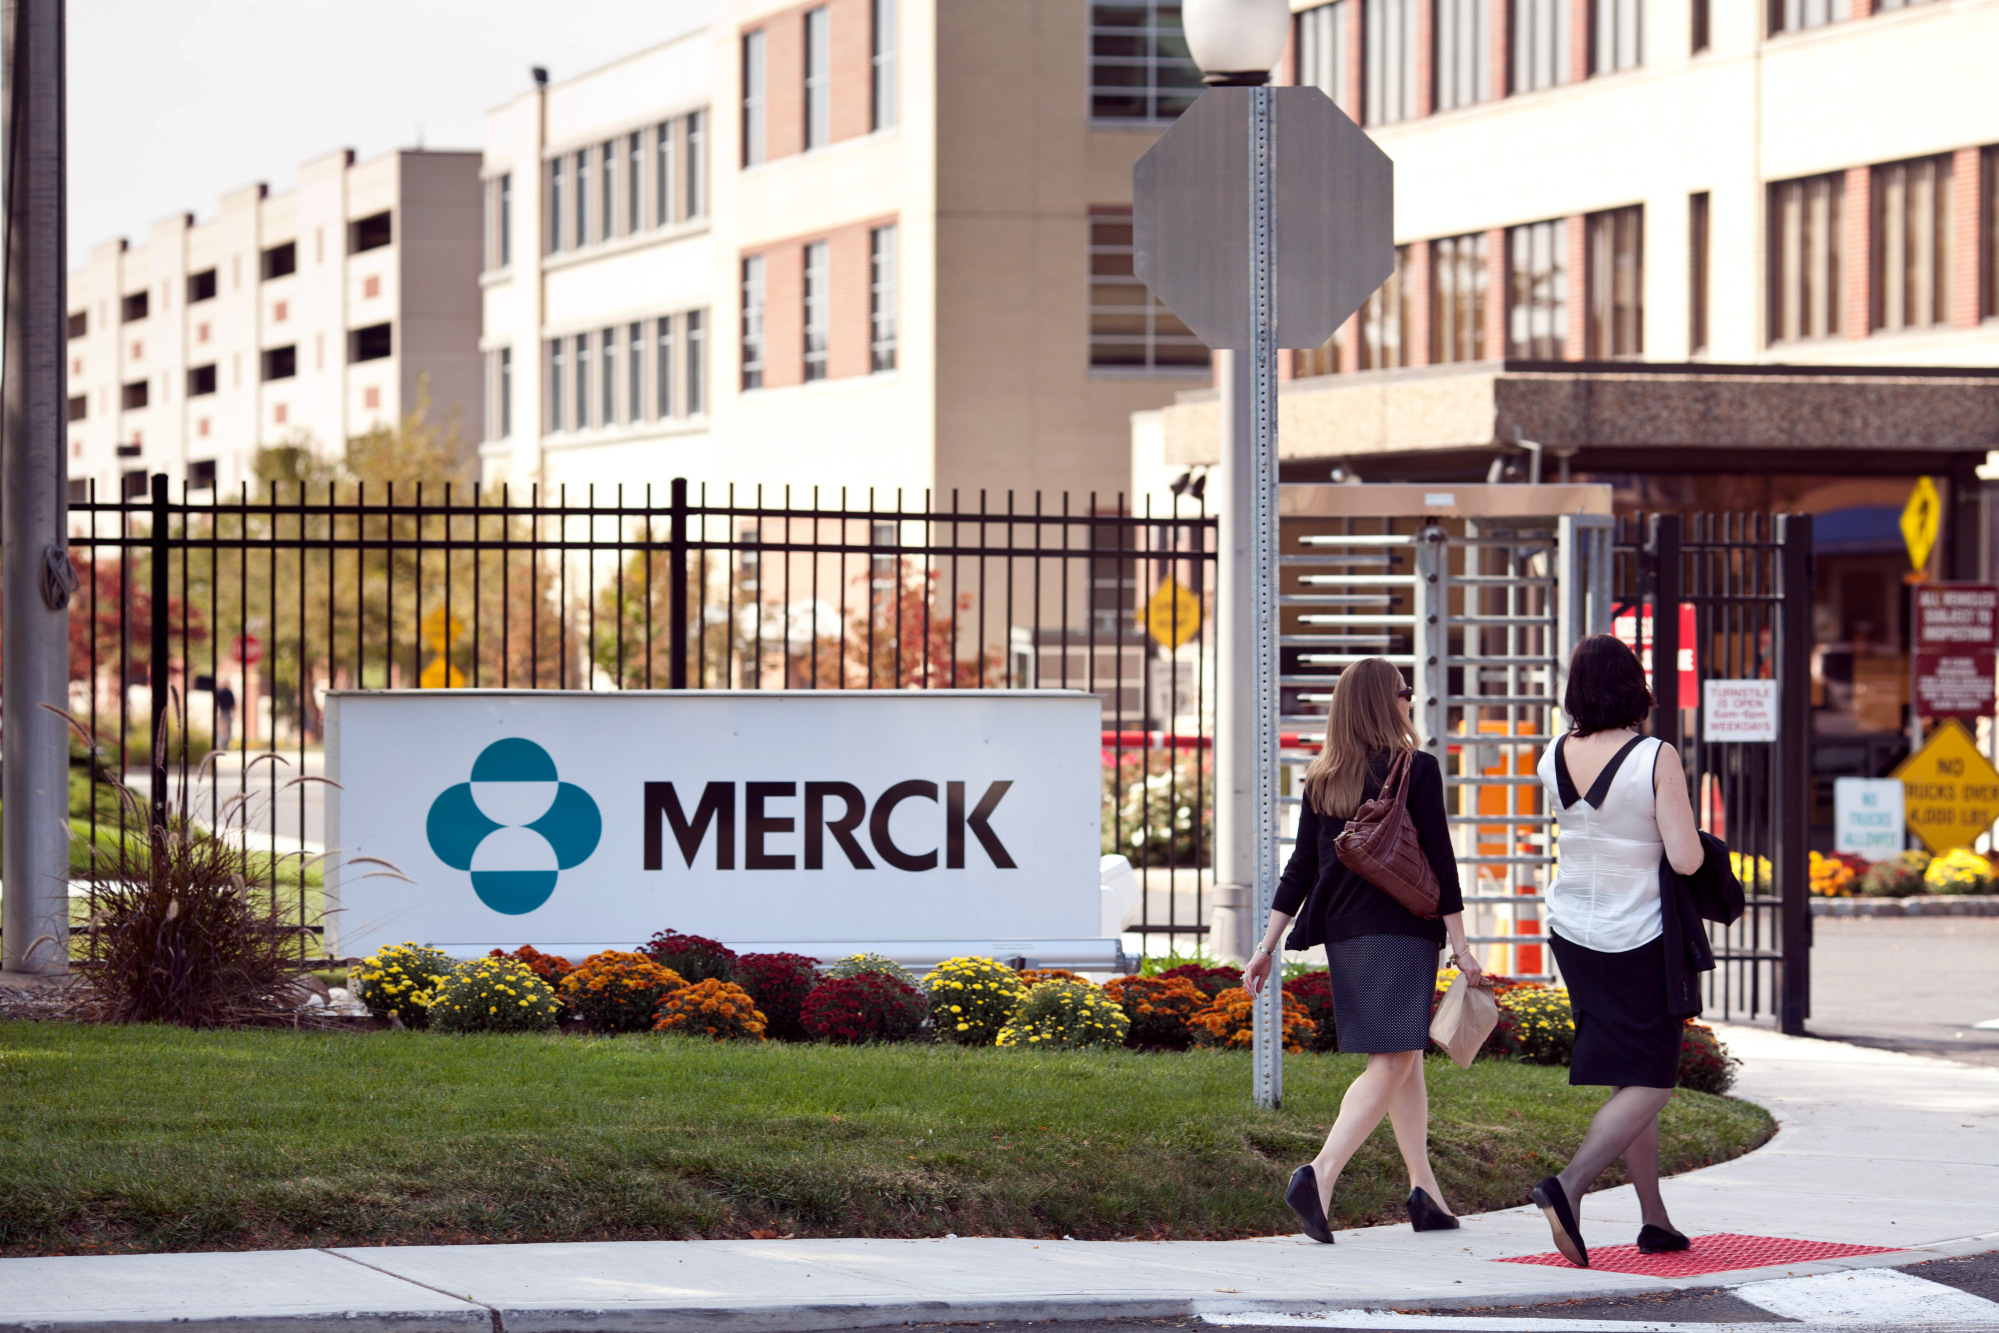 Workers enter a Merck facility located in Summit, New Jersey, Tuesday, October 1, 2013.
